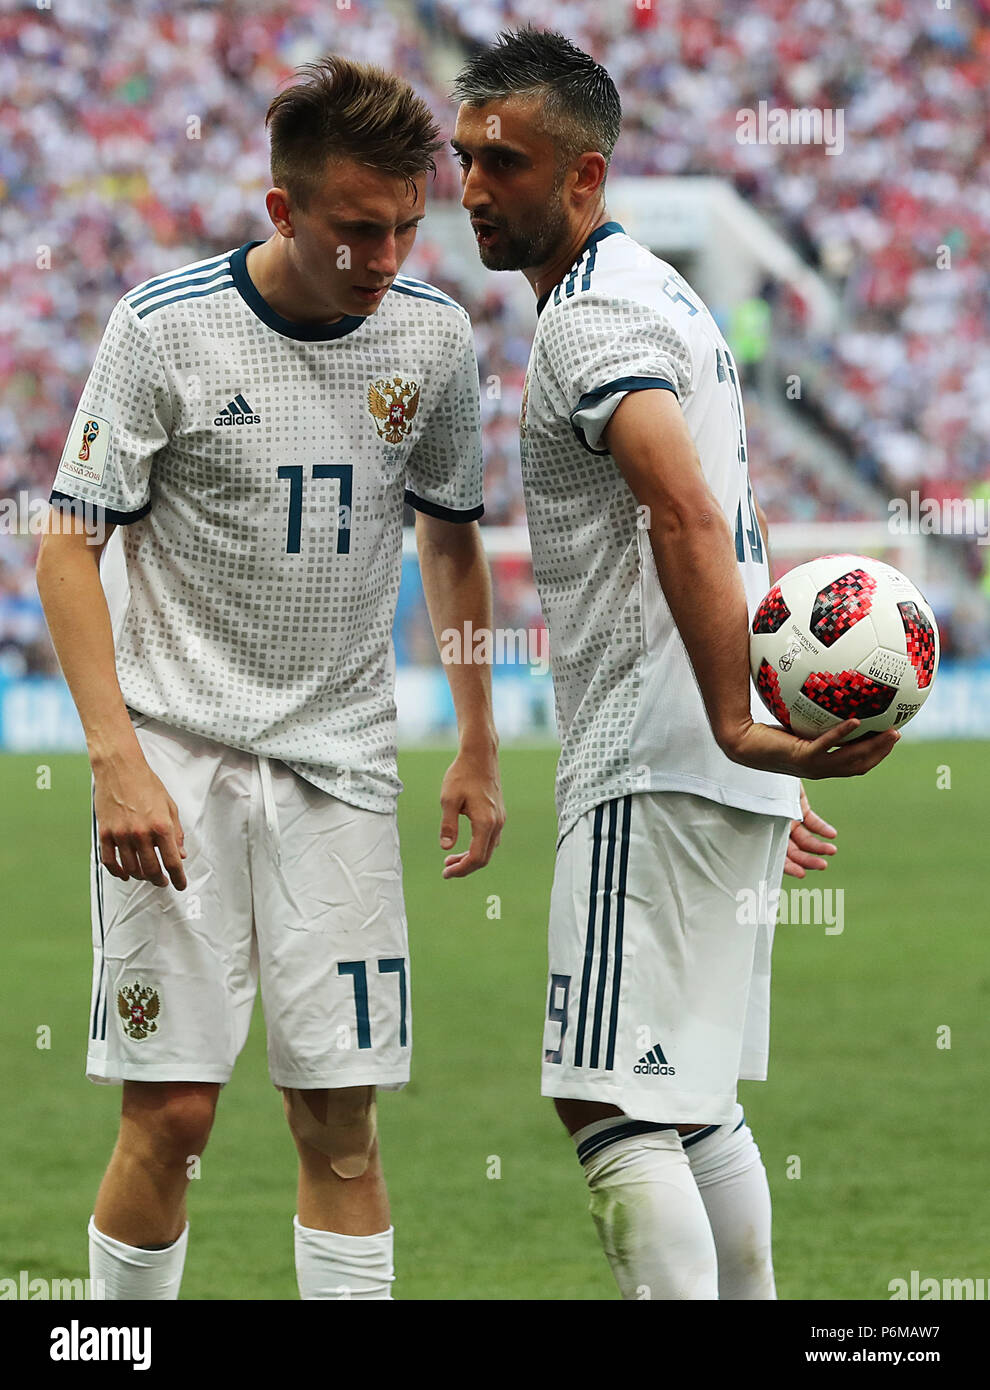 (180701) -- MOSCOW, July 1, 2018 (Xinhua) -- Russia's Alexander Samedov (R) talks with Aleksandr Golovin during the 2018 FIFA World Cup round of 16 match between Spain and Russia in Moscow, Russia, July 1, 2018. Russia won 5-4 (4-3 in penalty shootout) and advanced to the quarter-final.(Xinhua/Yang Lei) Stock Photo